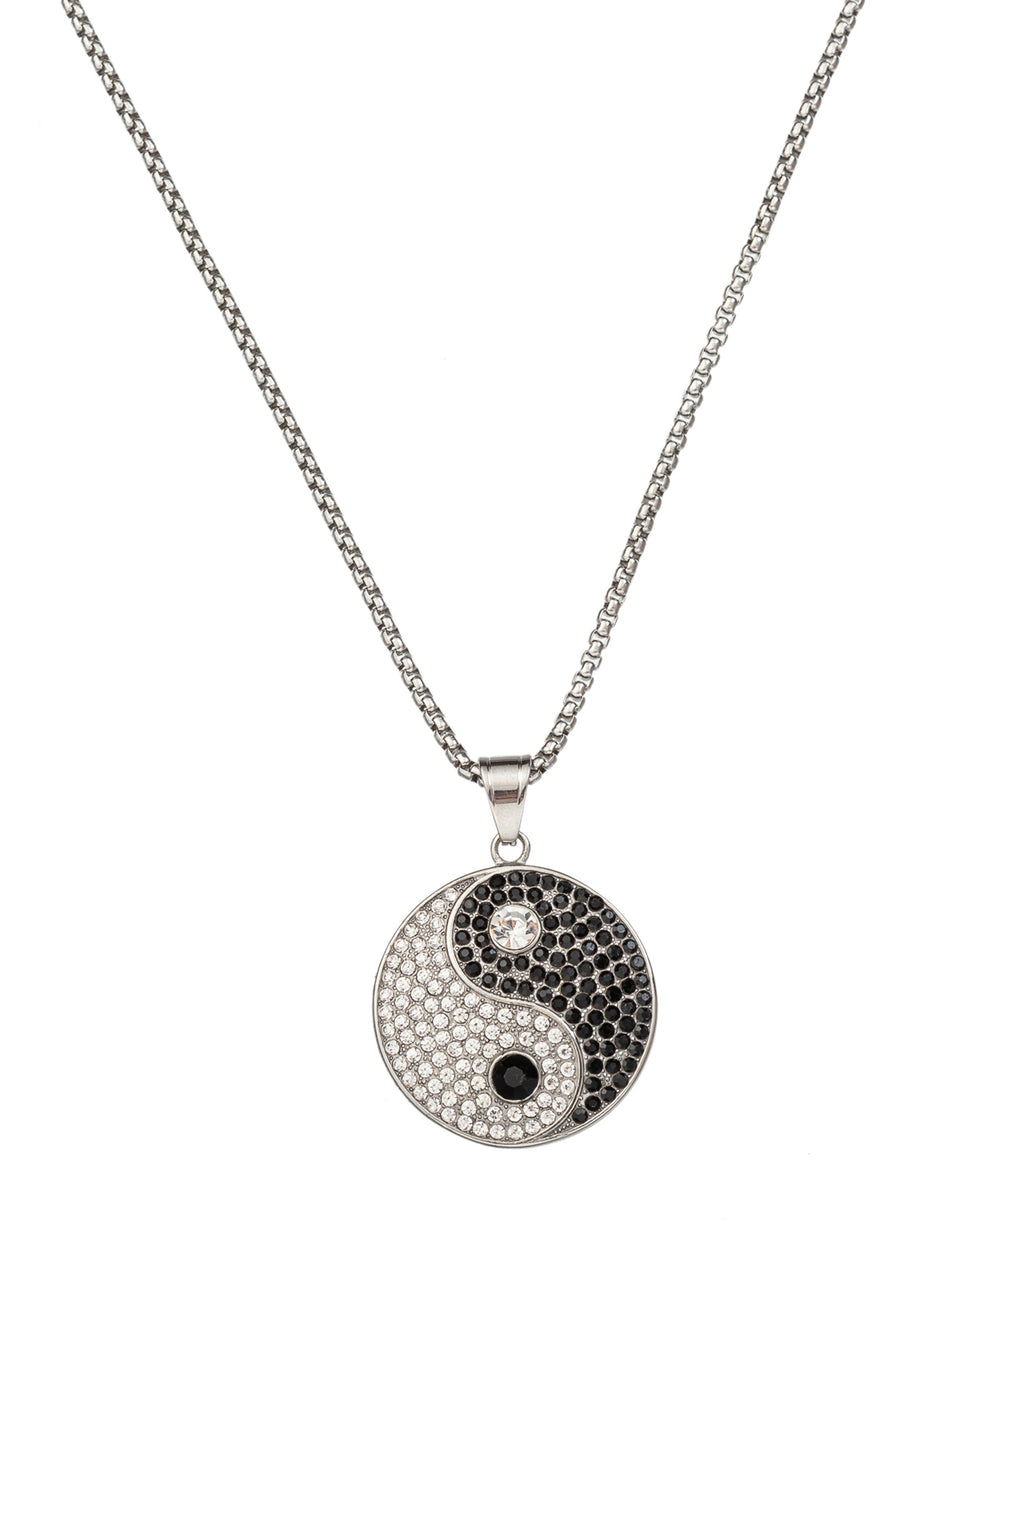 Silver tone titanium yin & yang pendant necklace studded with CZ crystals.